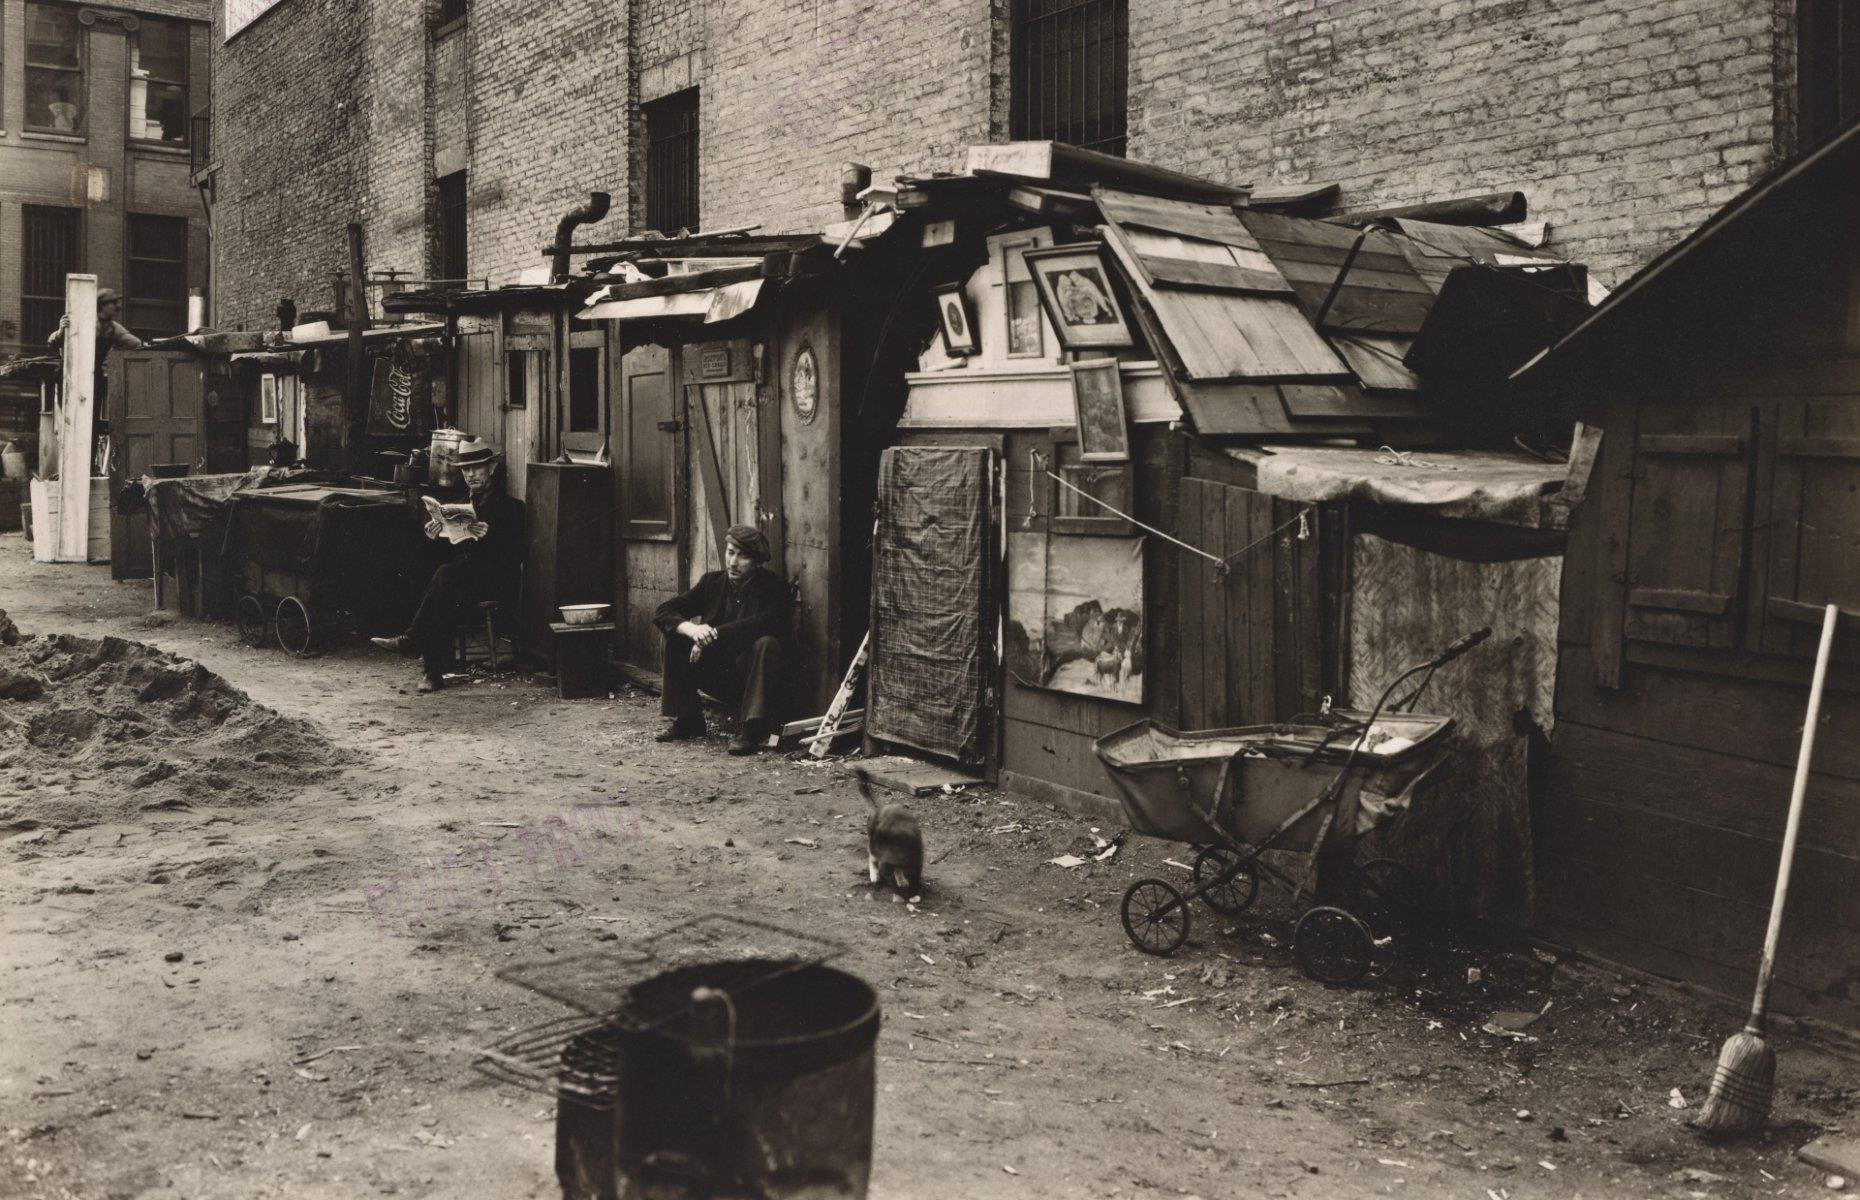 <p>As the Depression continued to bite, unemployed workers who were unable to pay rent found themselves cast onto the streets. Many made their way to large cities like New York (pictured) and San Francisco in search of work.</p>  <p>Unable to pay for even the simplest hostels, they roamed the streets and found shelter under bridges, in culverts, or camped in alleys and doorways. Some cities turned a blind eye to the homeless; others turfed them out and hoped they’d move on.</p>